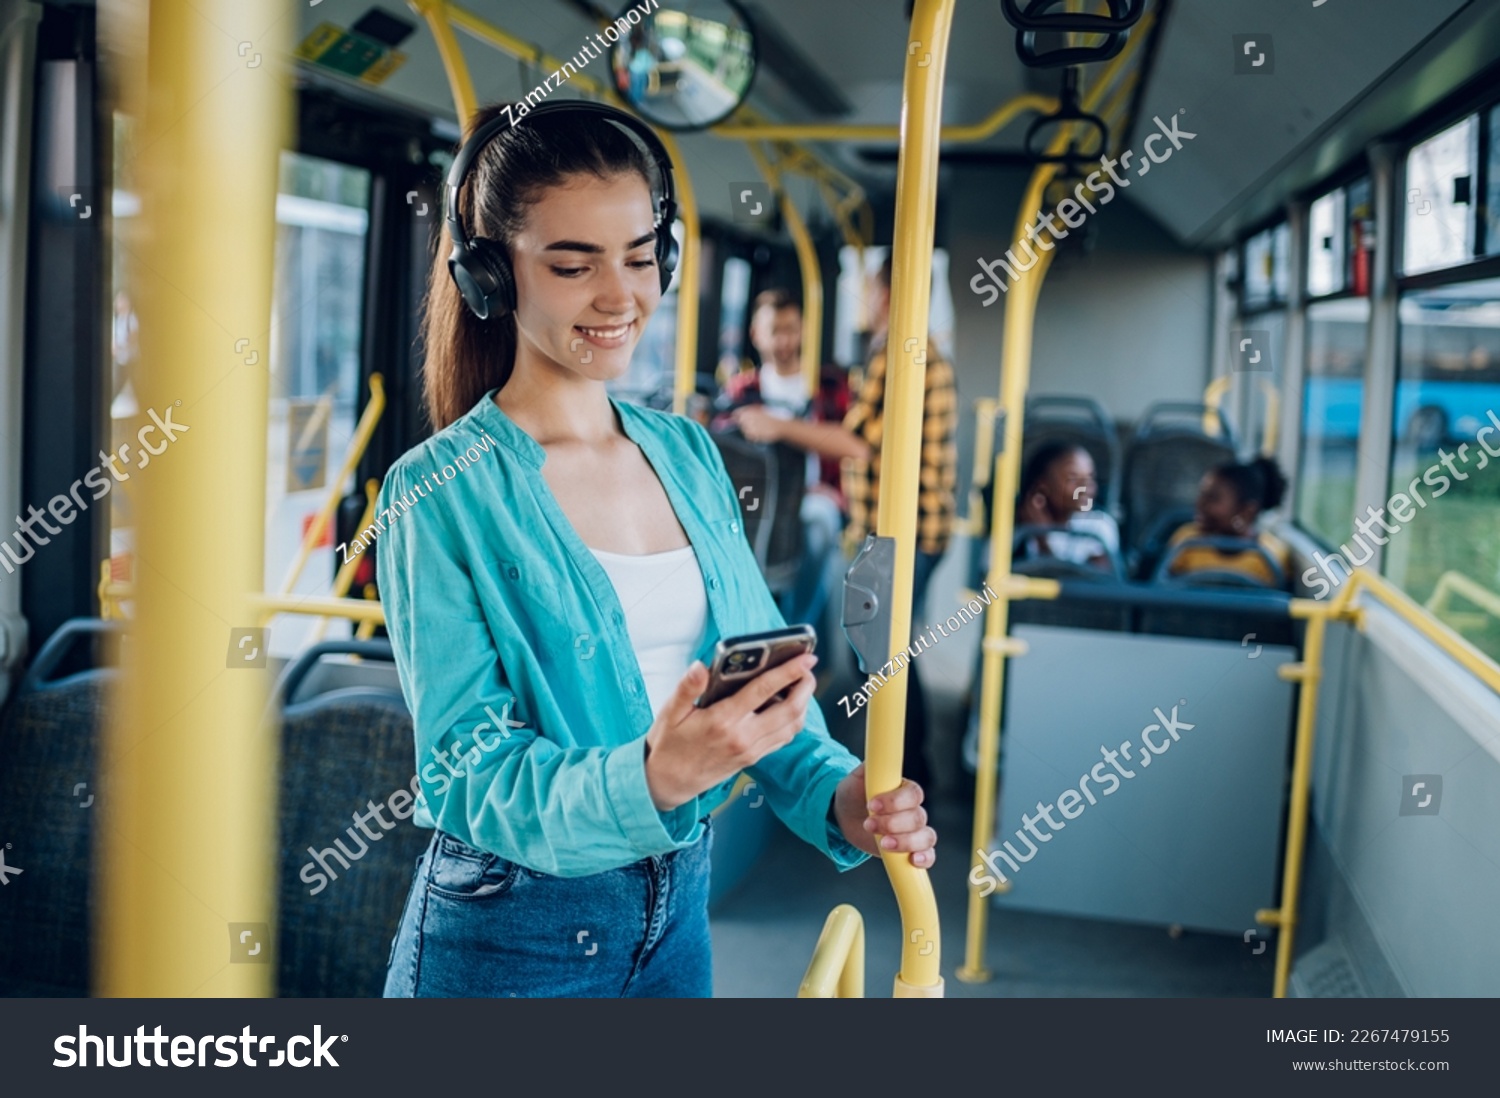 Young woman smiling while standing by herself on a bus and listening to music on a smartphone. Happy female passenger using headphones and a mobile phone in public transportation. Copy space. #2267479155